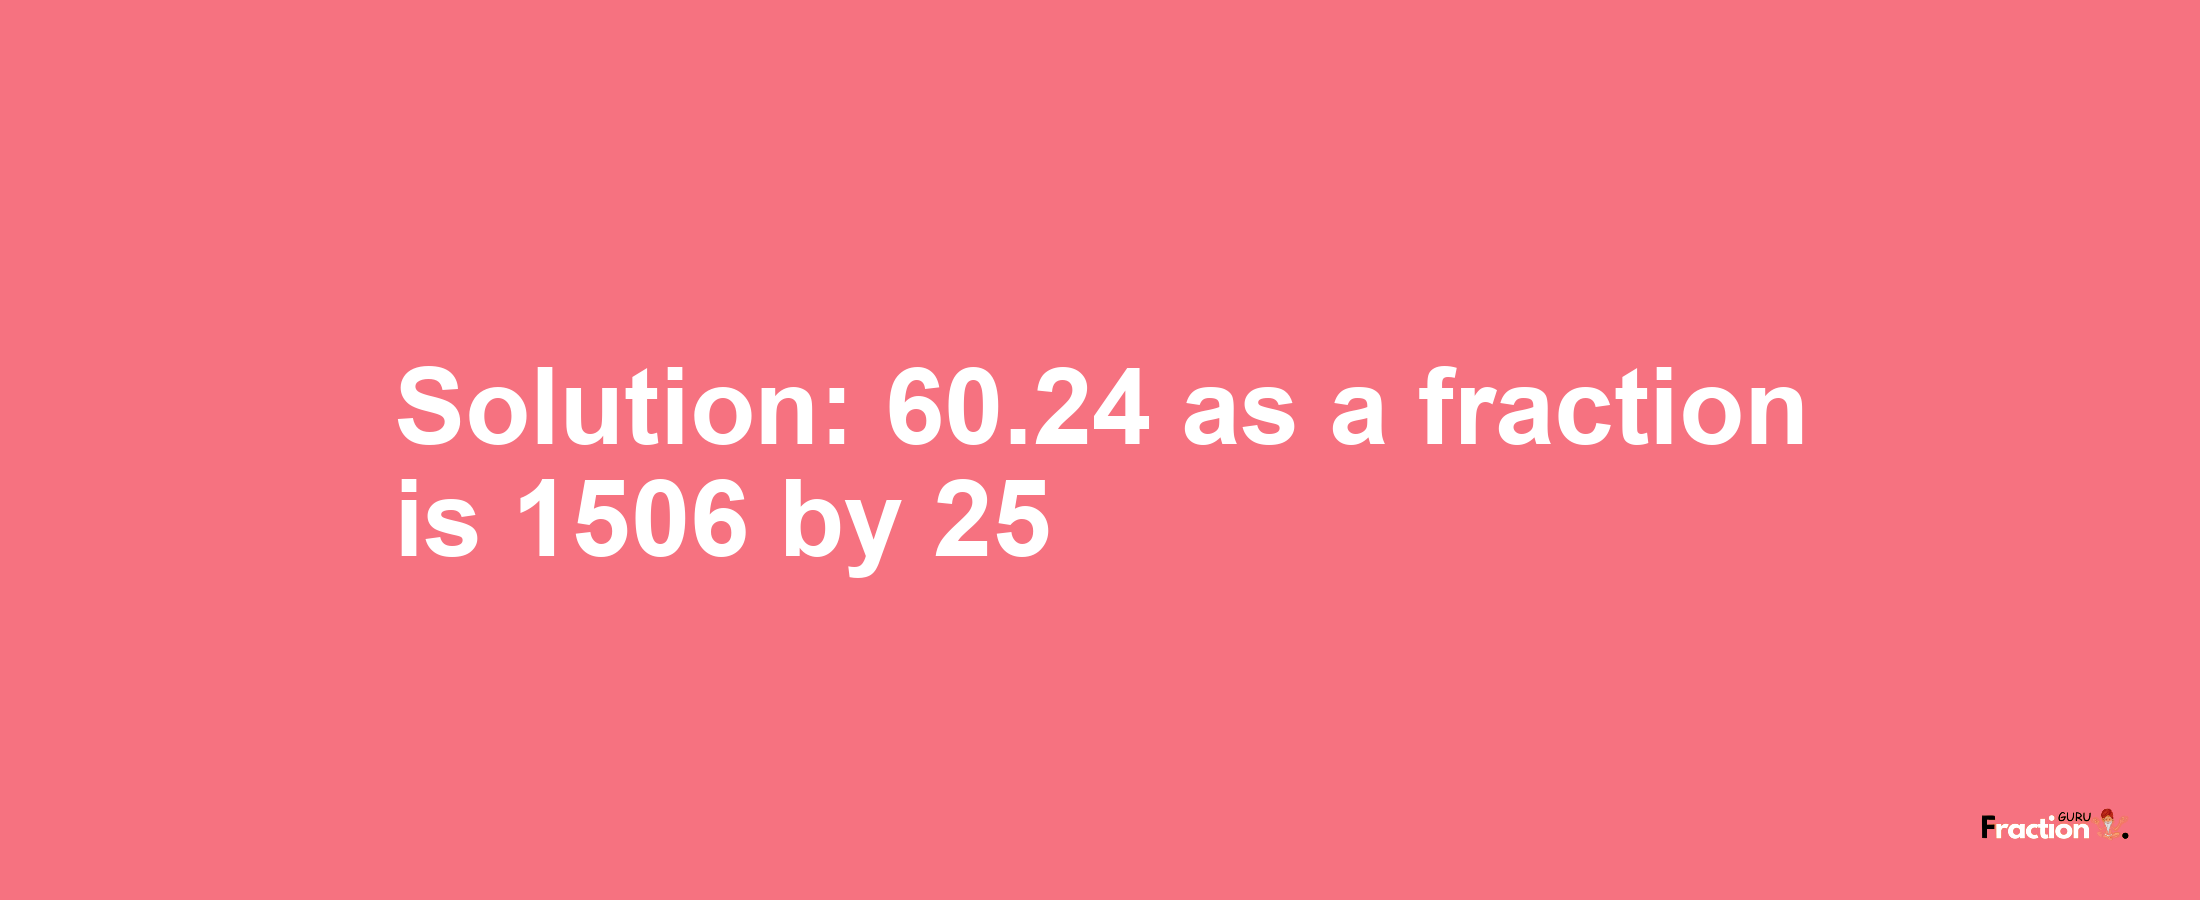 Solution:60.24 as a fraction is 1506/25